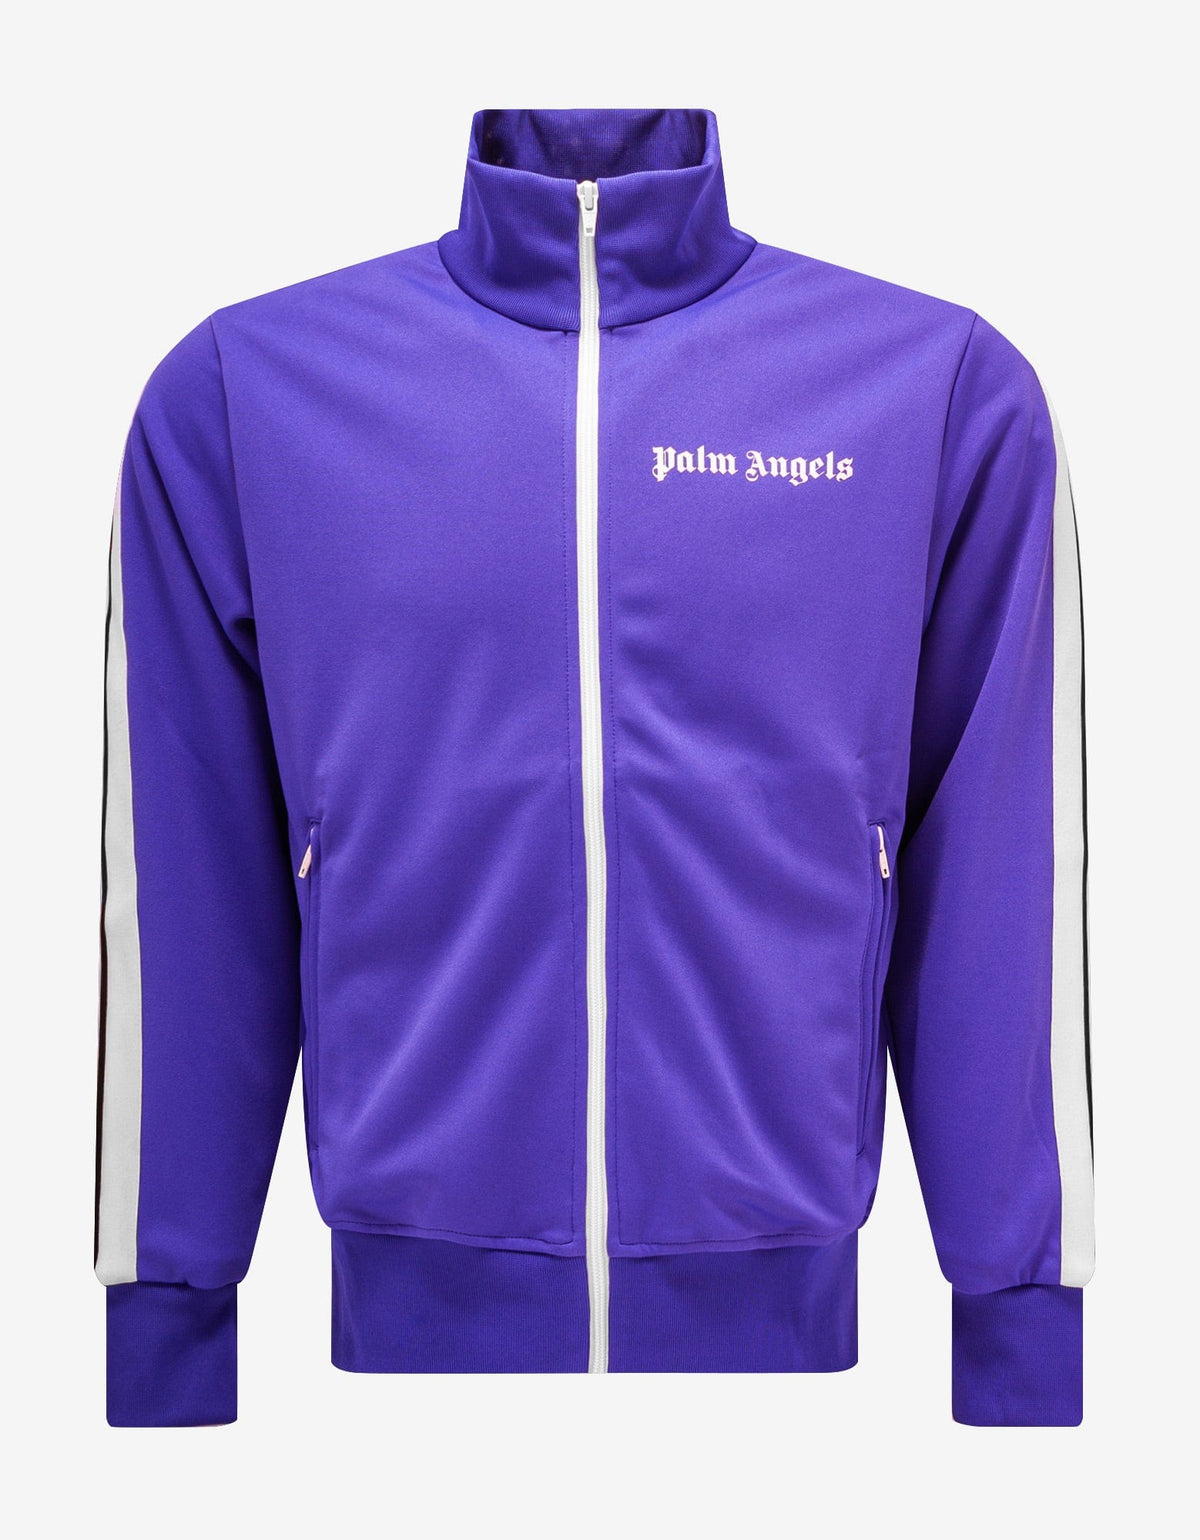 Palm Angels Purple Track Jacket with Stripes